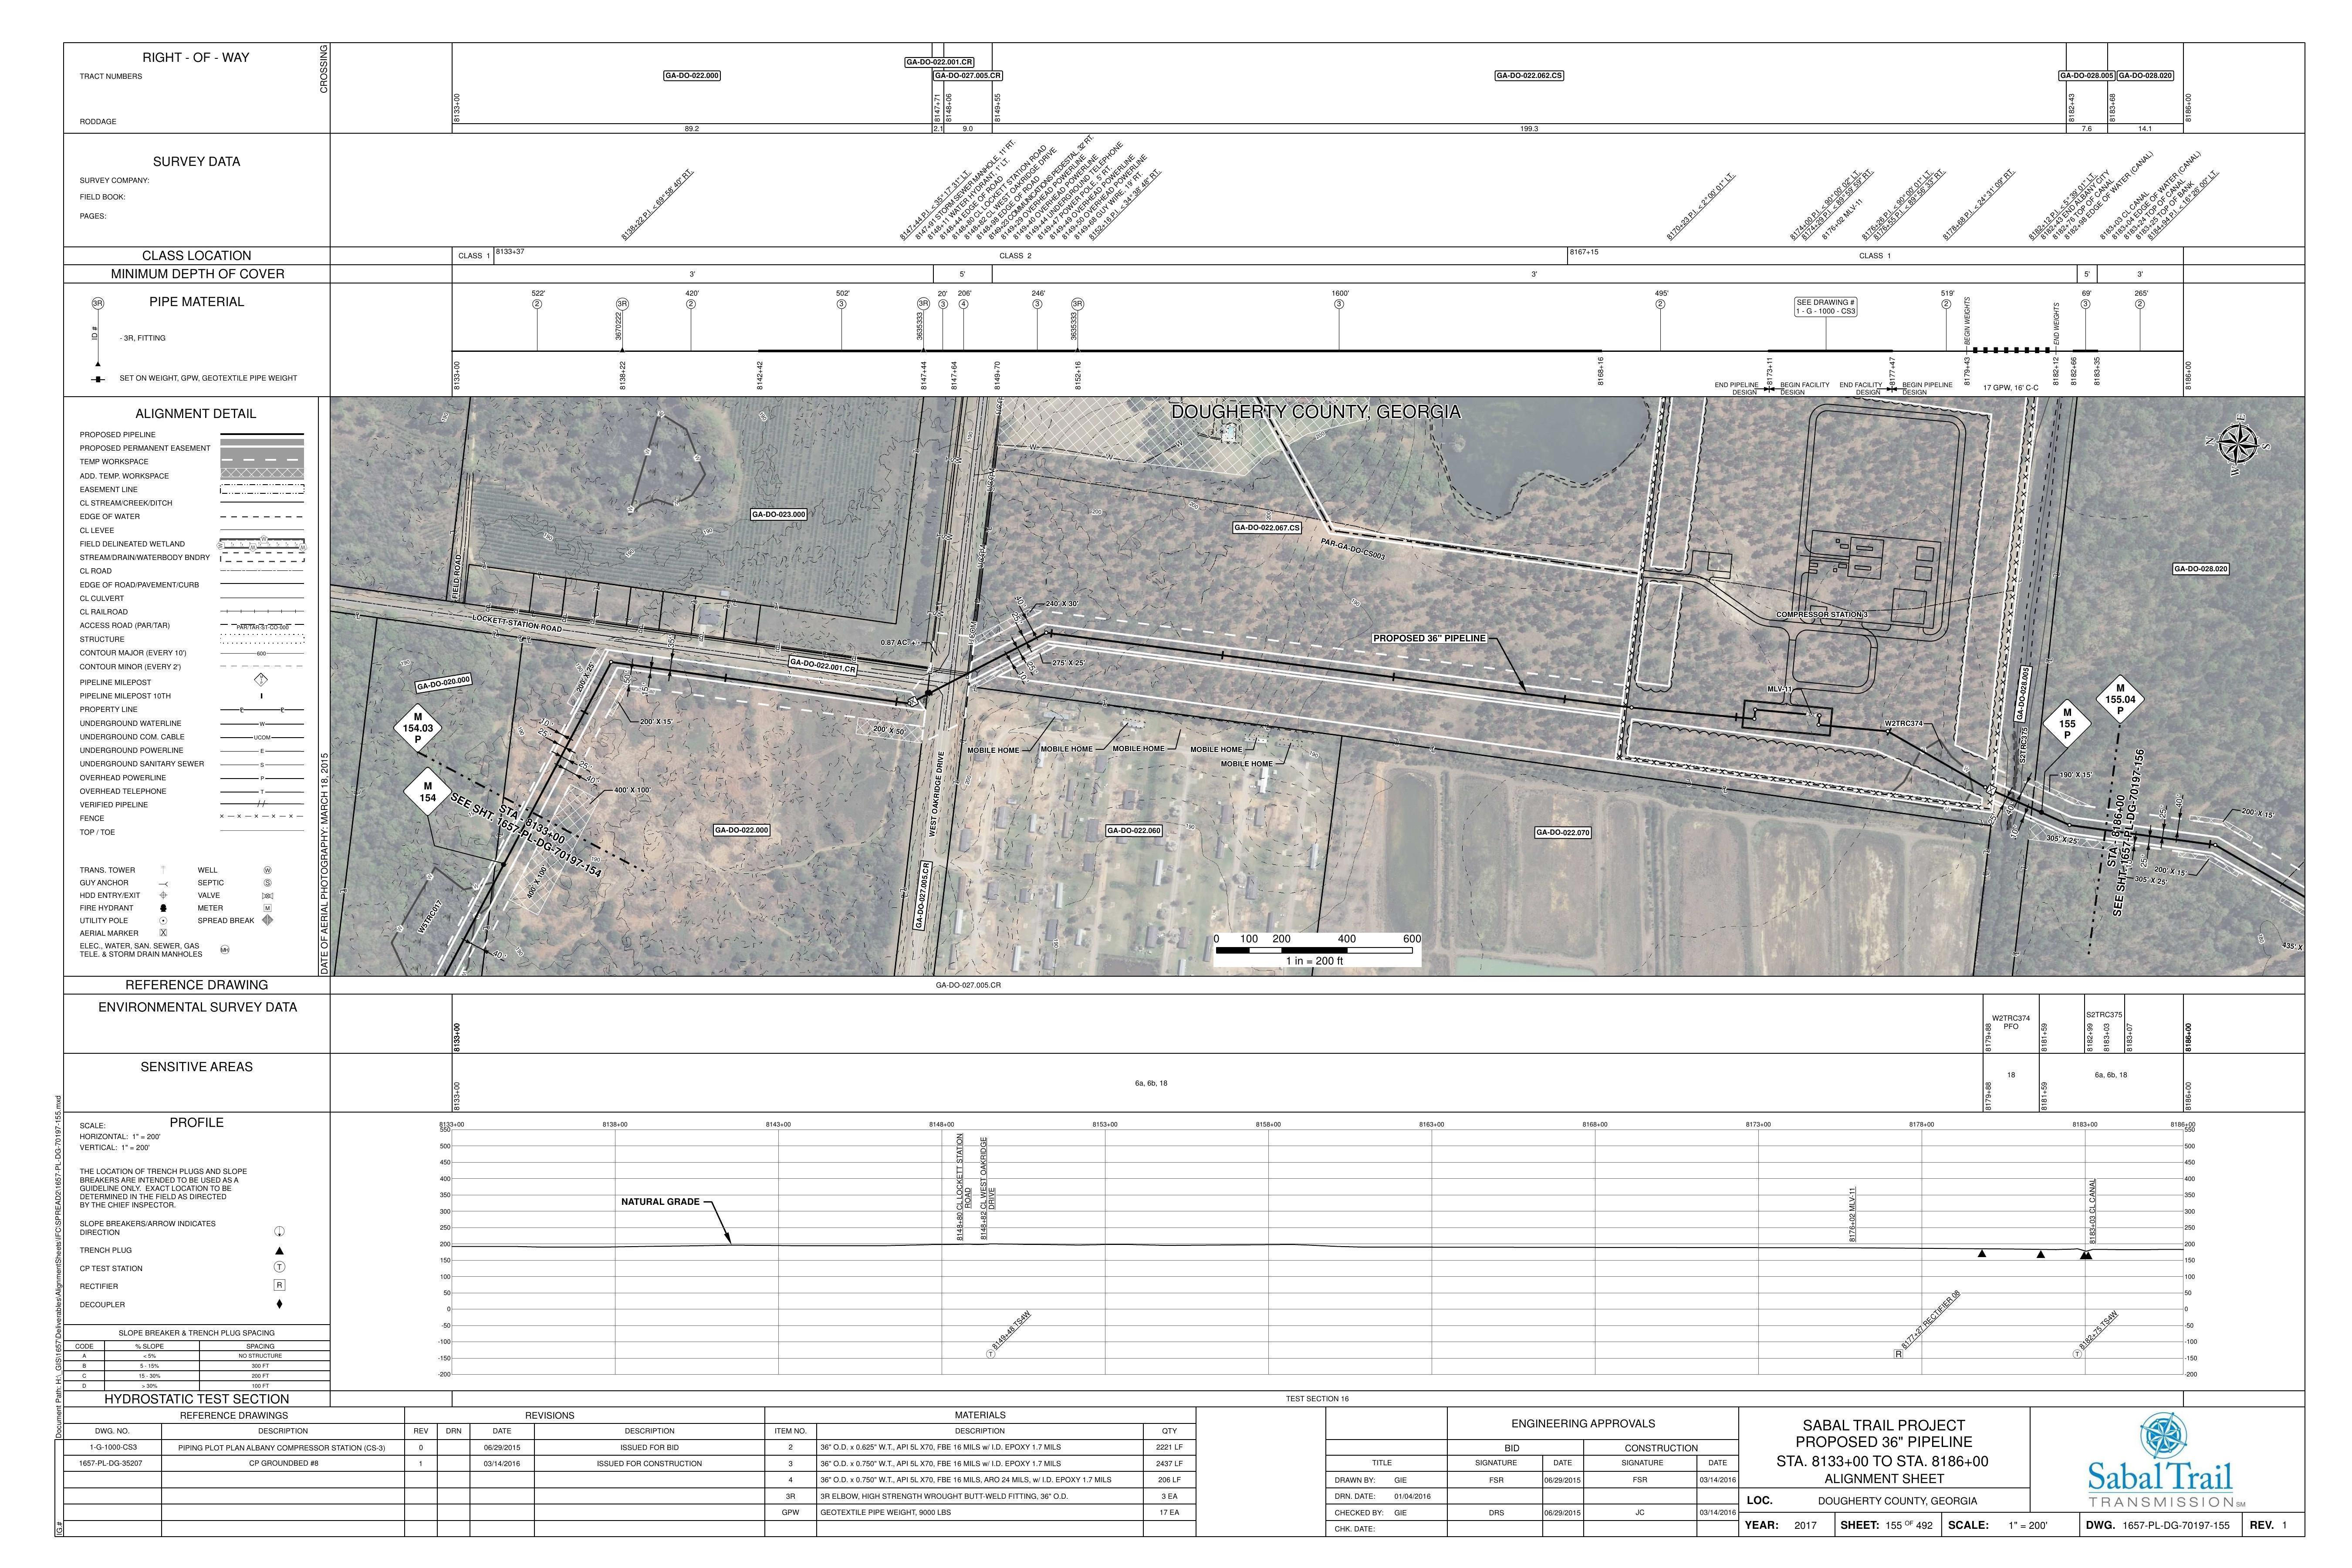 1657-PL-DG-70197-155, STA. 8133+00 TO STA. 8186+00, MP 154.03, MP 155, MP 155.04, PIPING PLOT PLAN ALBANY COMPRESSOR STATION (CS-3), COMPRESSOR STATION 3, BEGIN PIPELINE, END PIPELINE, DOUGHERTY COUNTY, GEORGIA